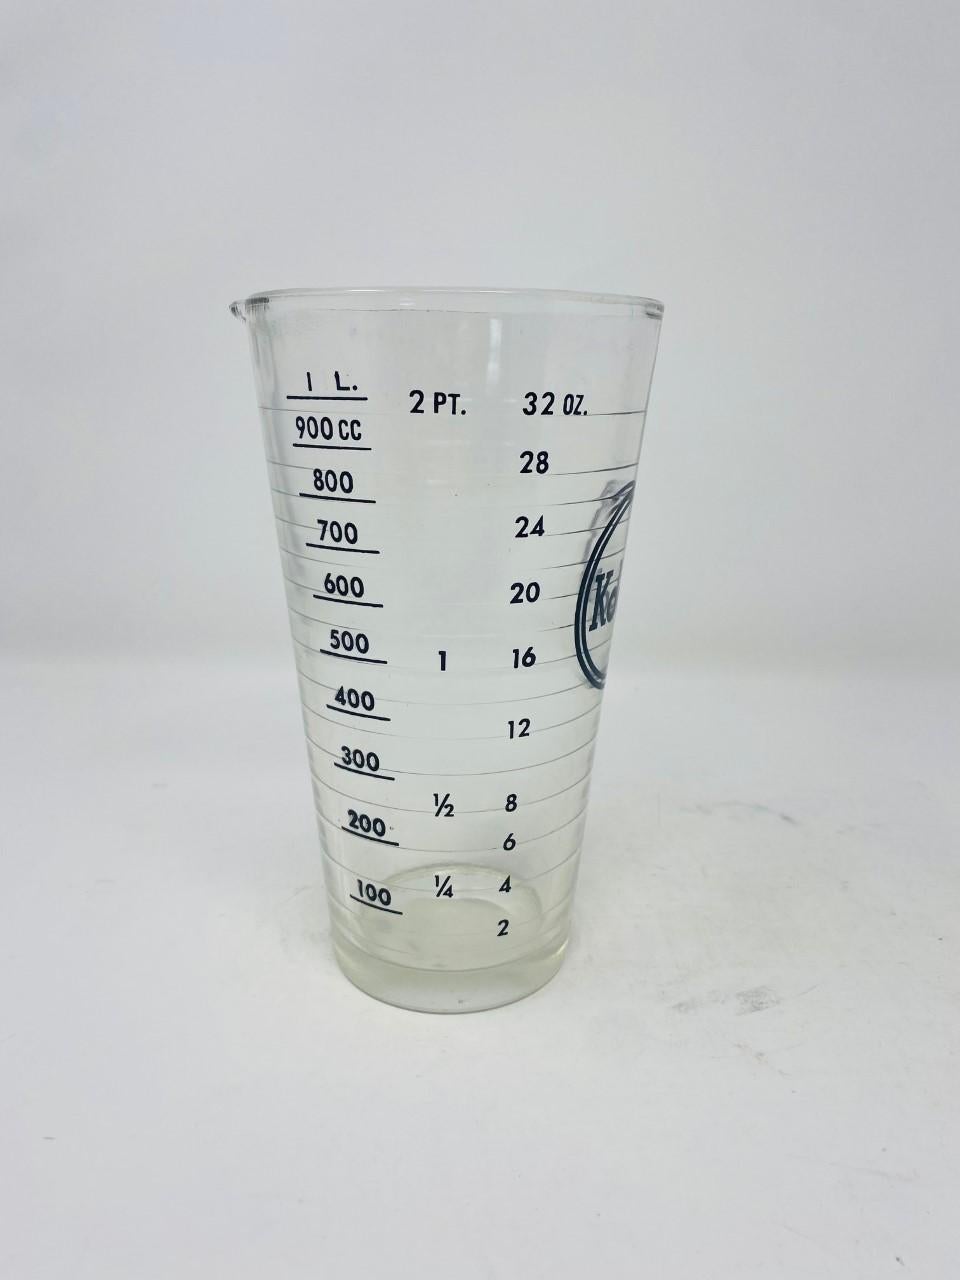 Vintage 1940s glass Kodak developer beaker. This amazing piece is minimal and cool, and features a large 32 ounce capacity for holding and measuring liquids. Used primarily in dark rooms for photo developer solution, this beaker would be a great